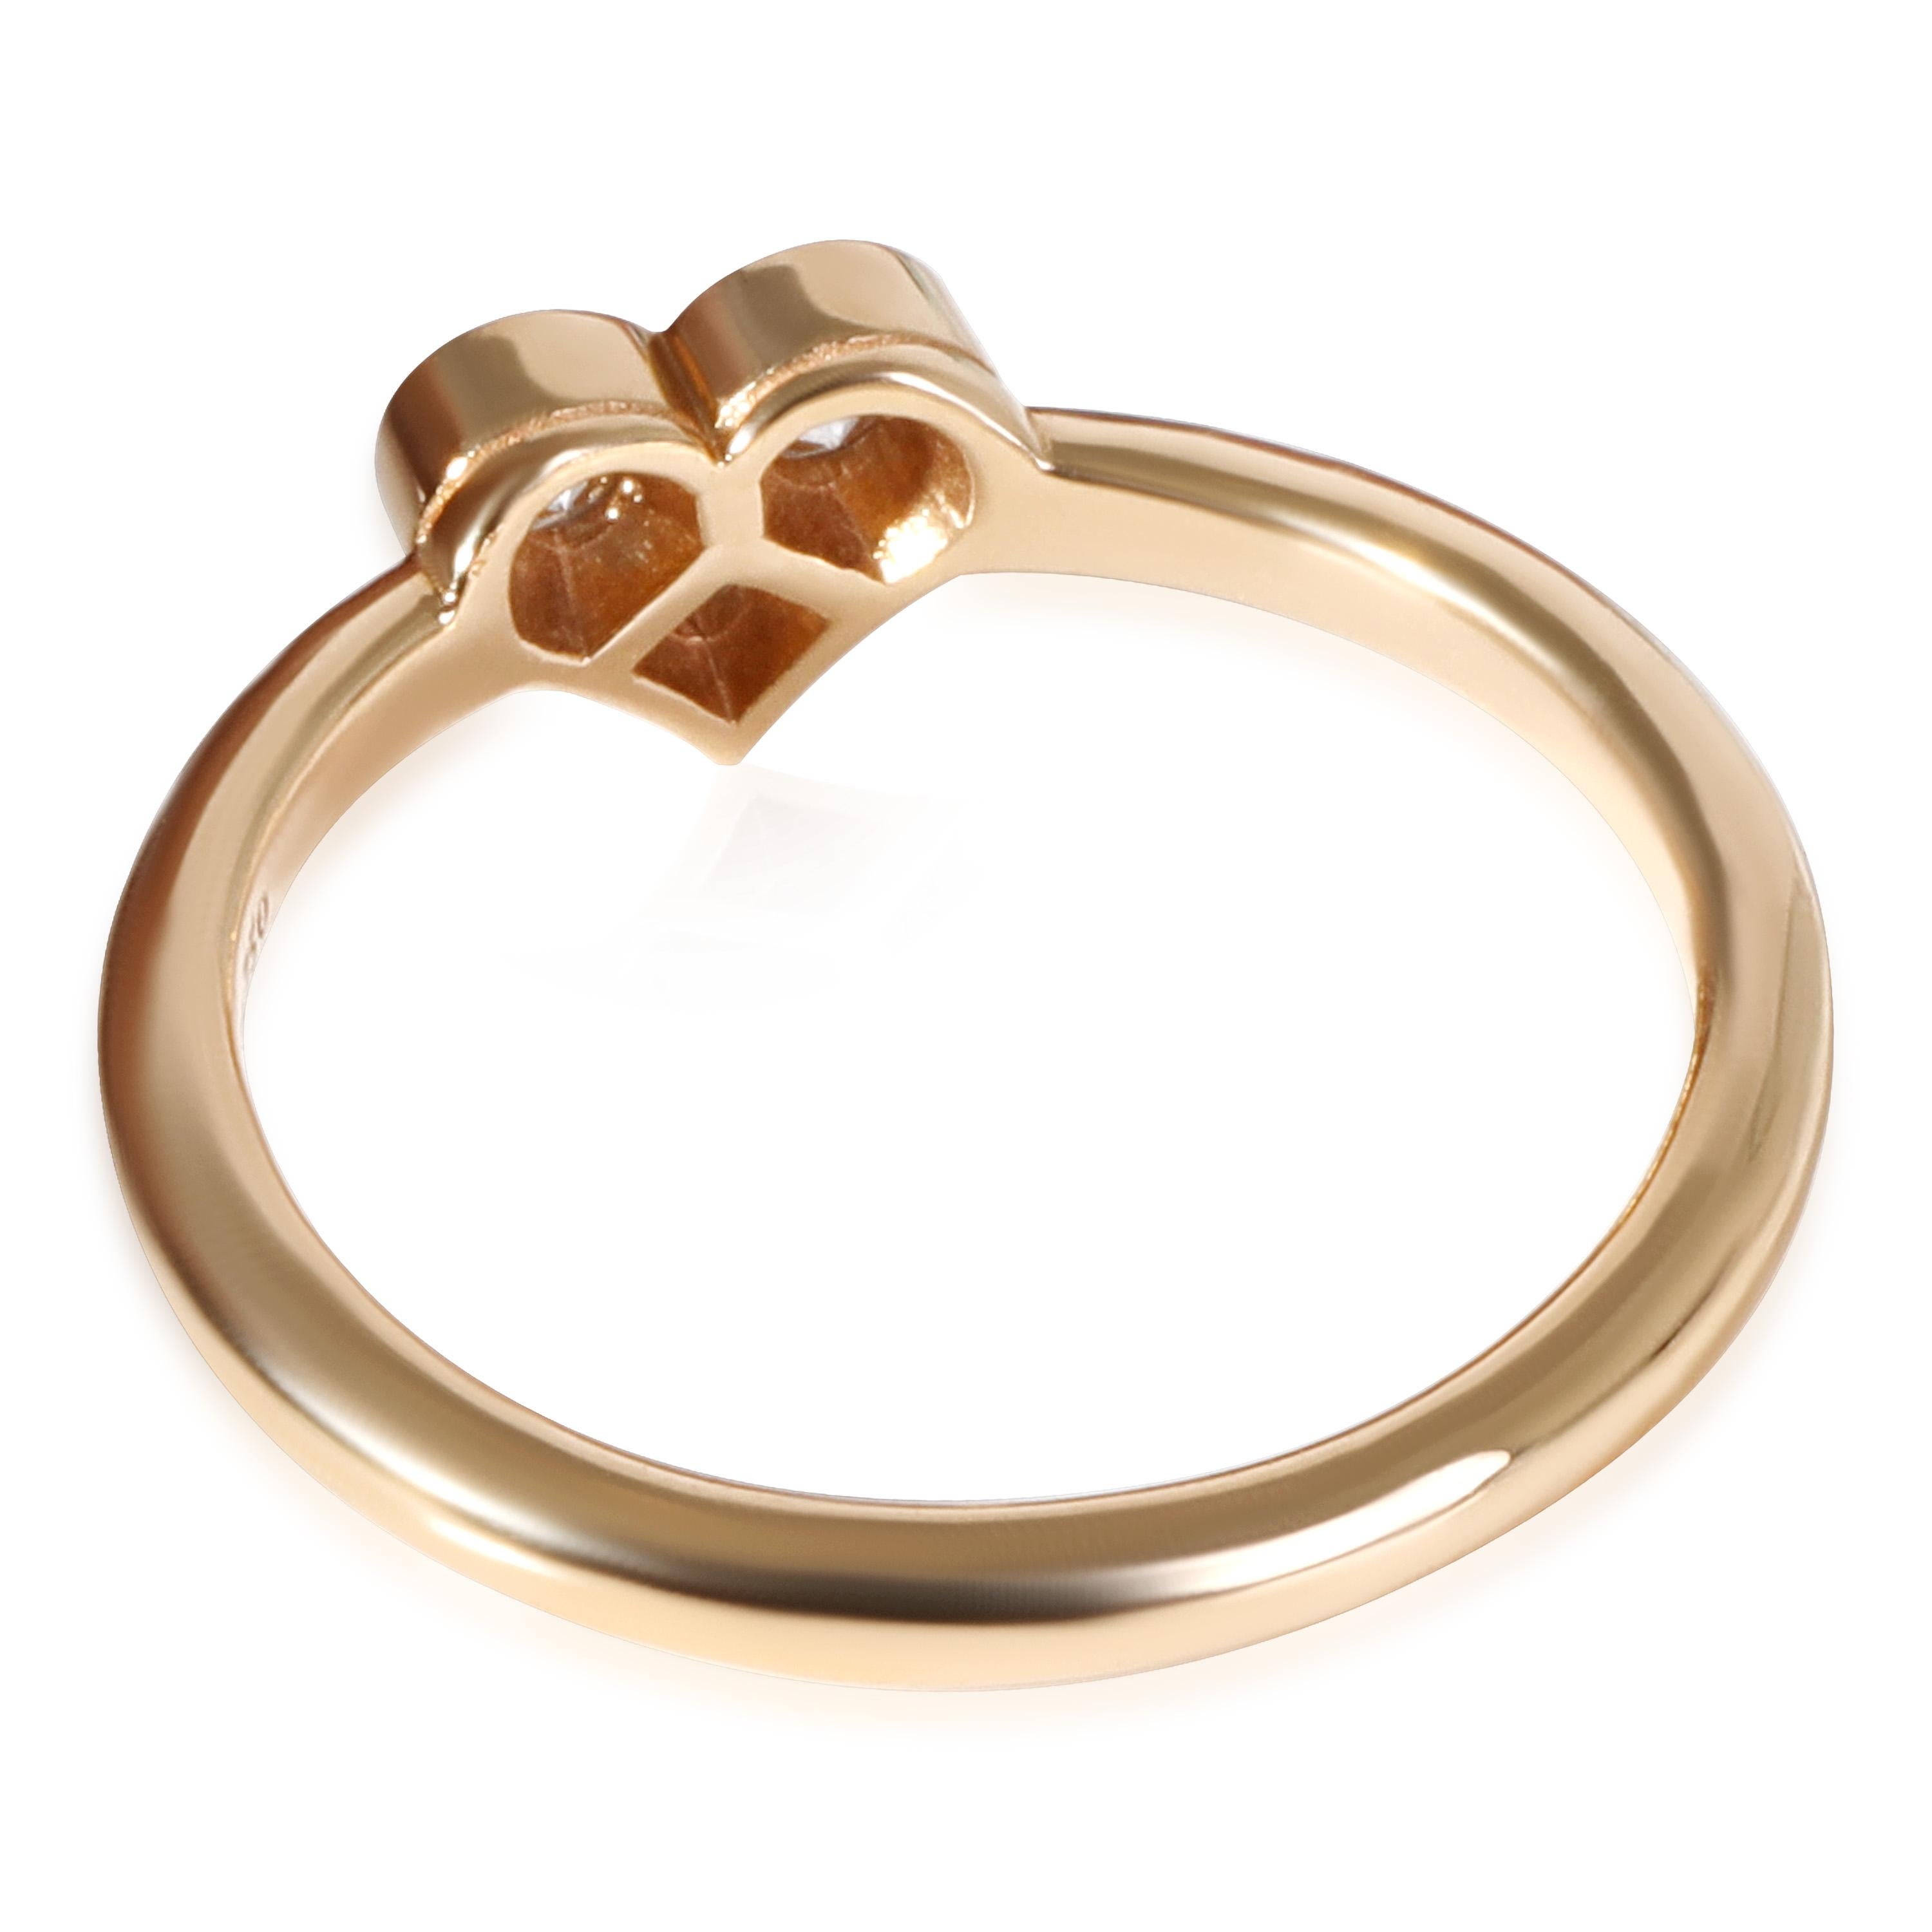 Tiffany & Co. Hearts Diamond  Ring in 18K Rose Gold 0.19 CTW

PRIMARY DETAILS
SKU: 119081
Listing Title: Tiffany & Co. Hearts Diamond  Ring in 18K Rose Gold 0.19 CTW
Condition Description: Retails for 1900 USD. In excellent condition and recently